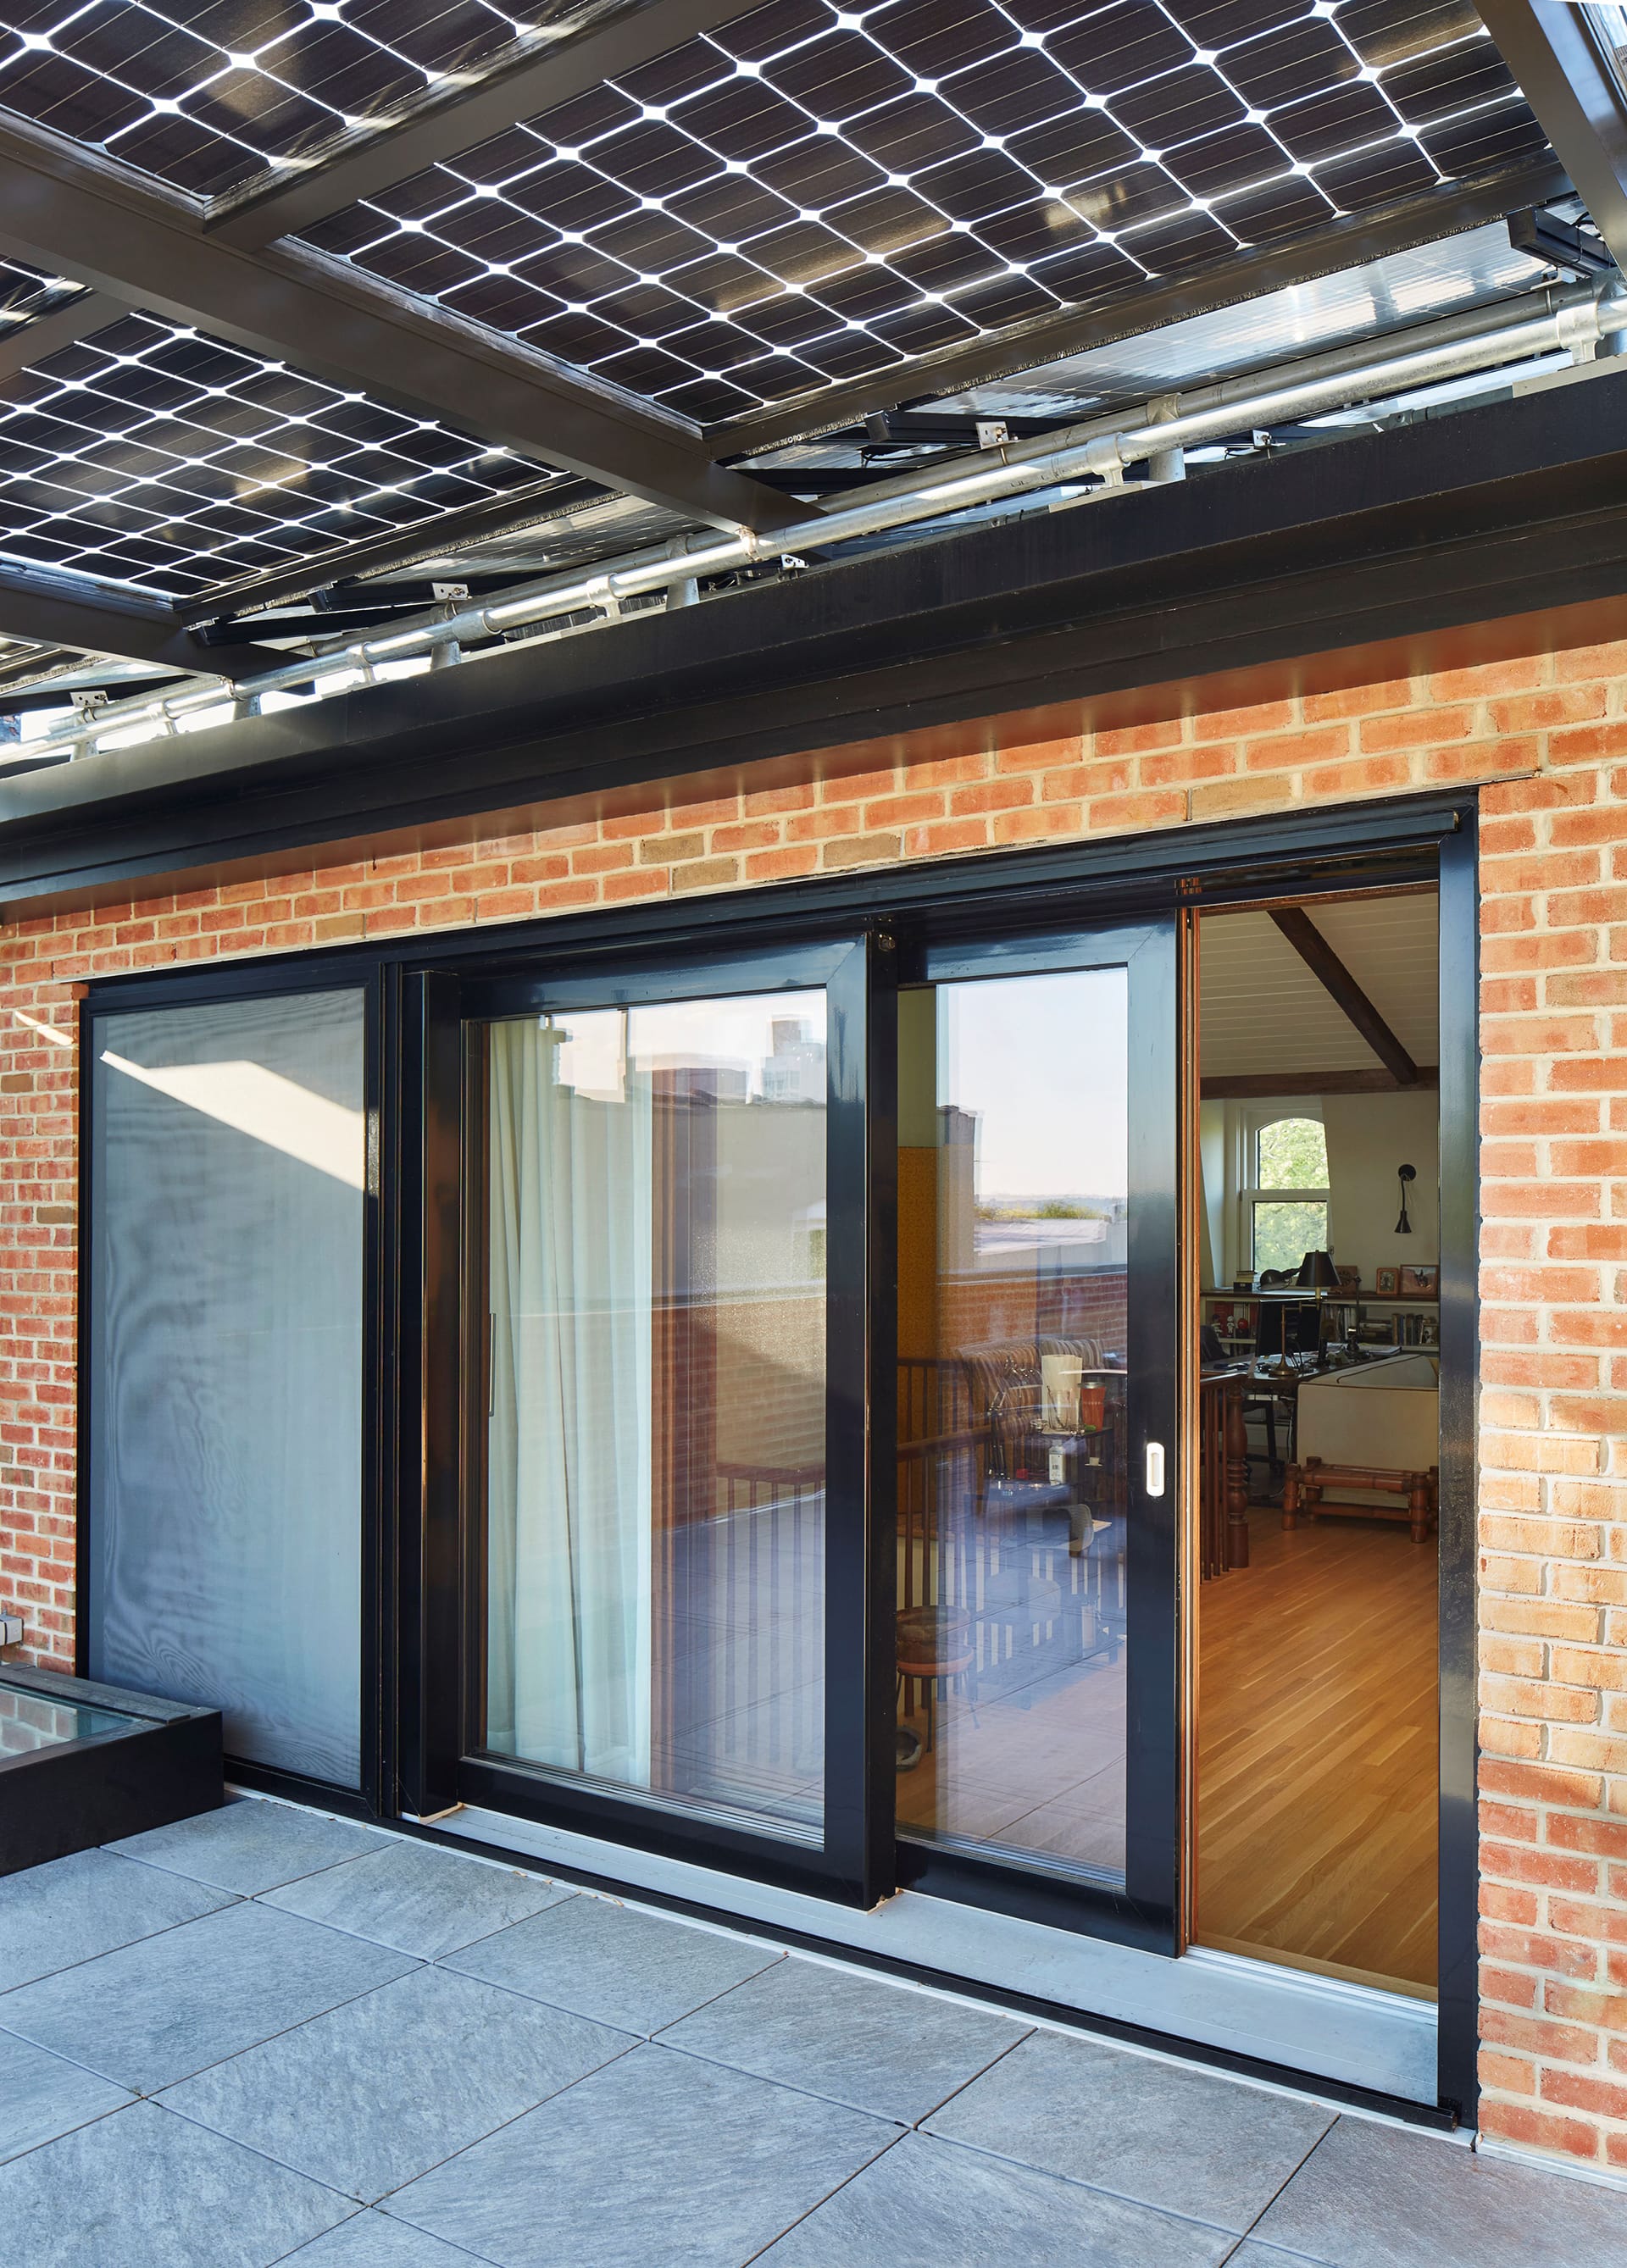 Large sliding glass doors separating an attic space from the roof deck. The roof deck has bluestone pavers and is covered by a solar canopy.